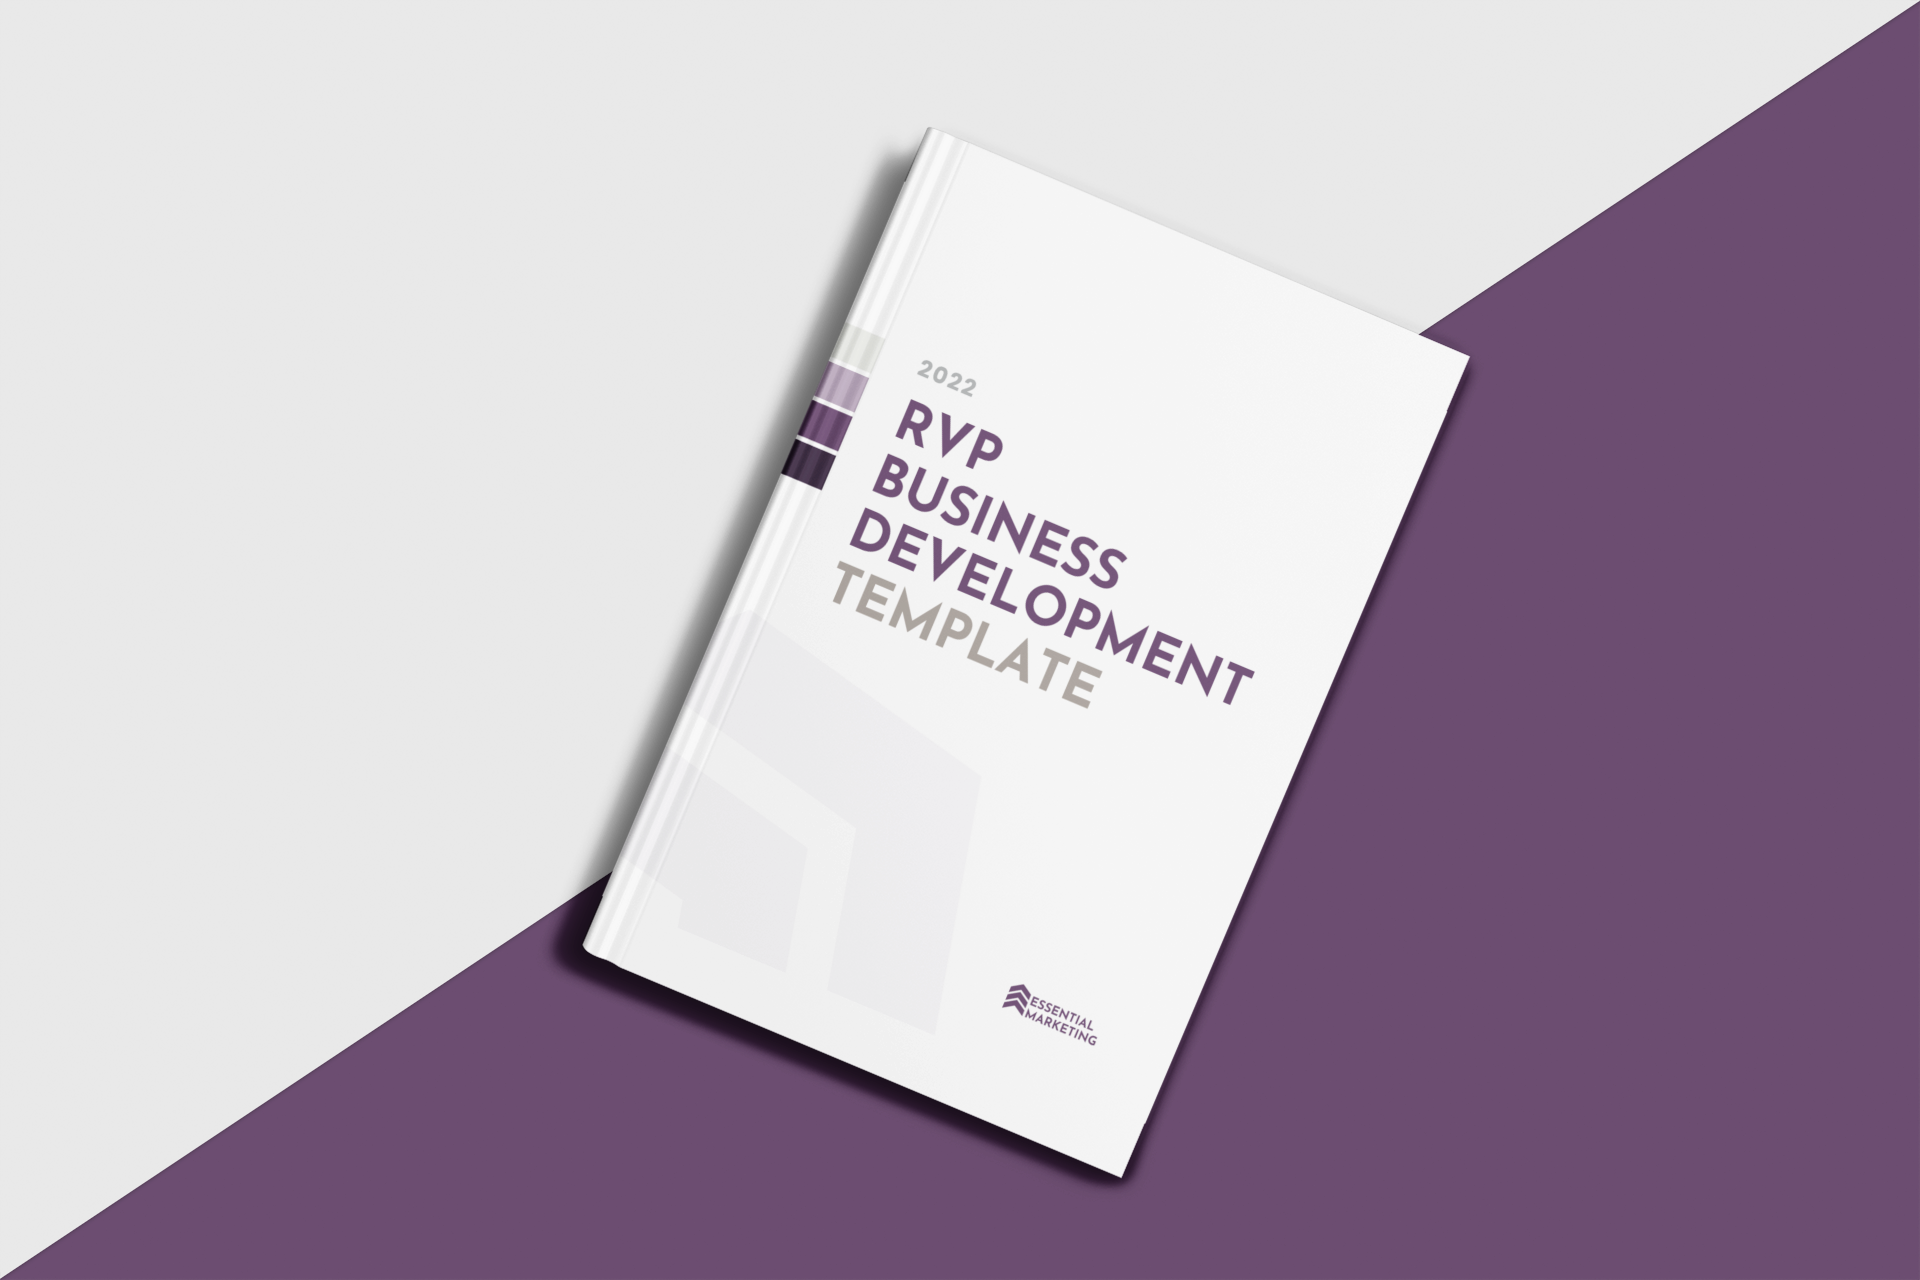 An image of the cover of the RVP Business Development Template